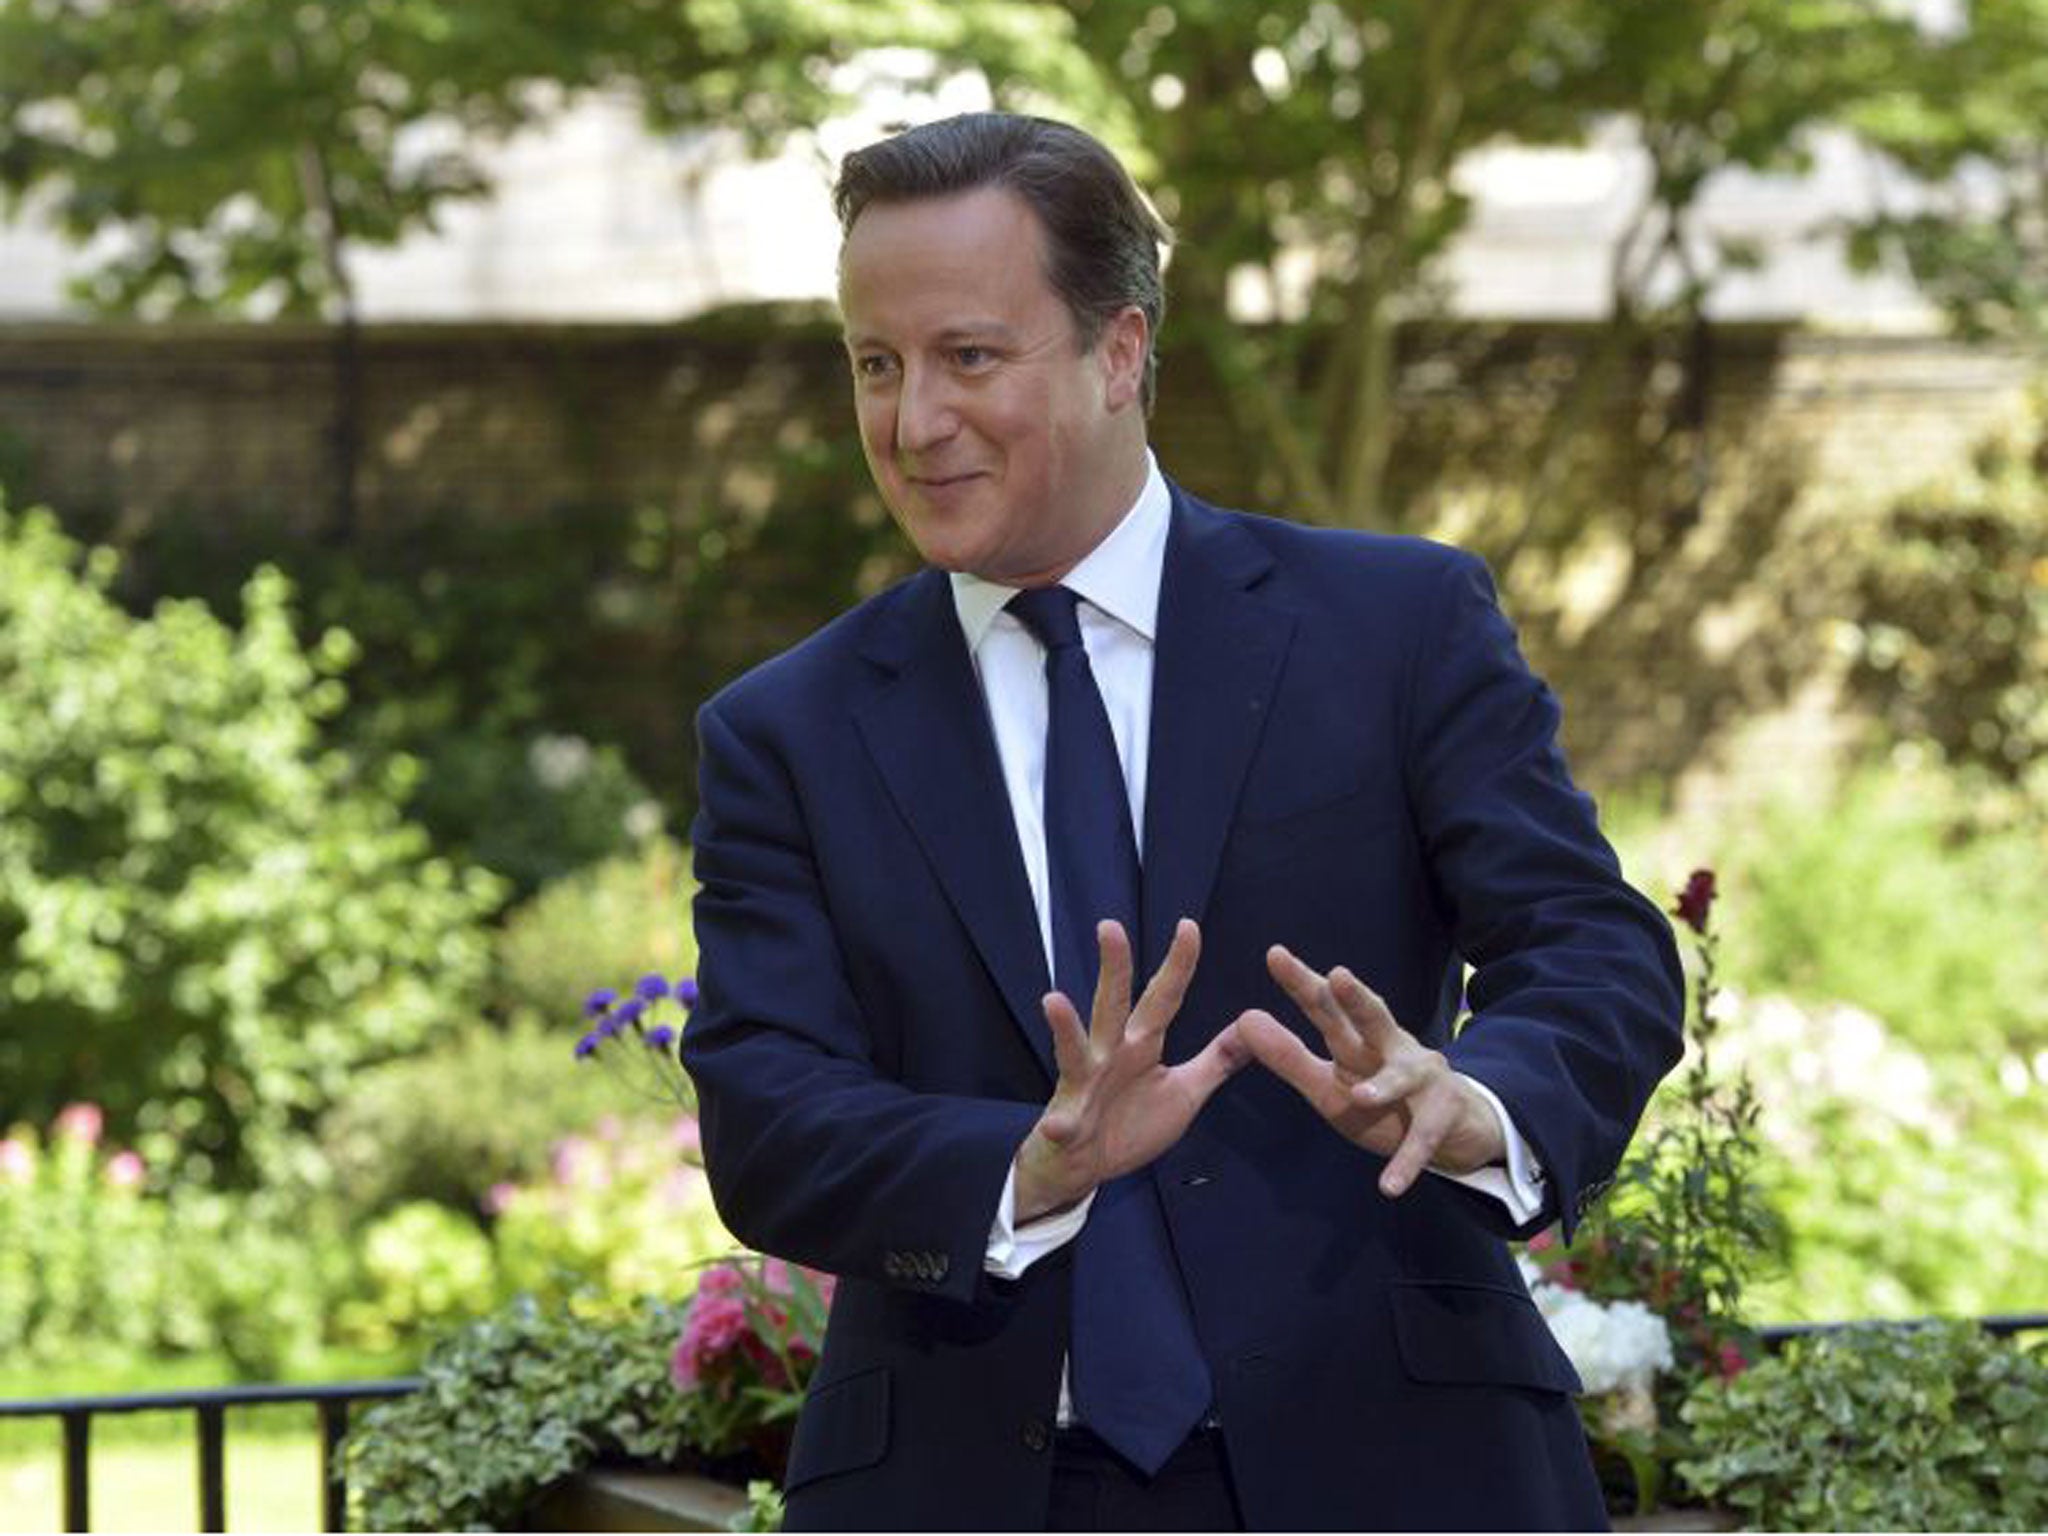 David Cameron during a televised interview held in the garden of 10 Downing Street